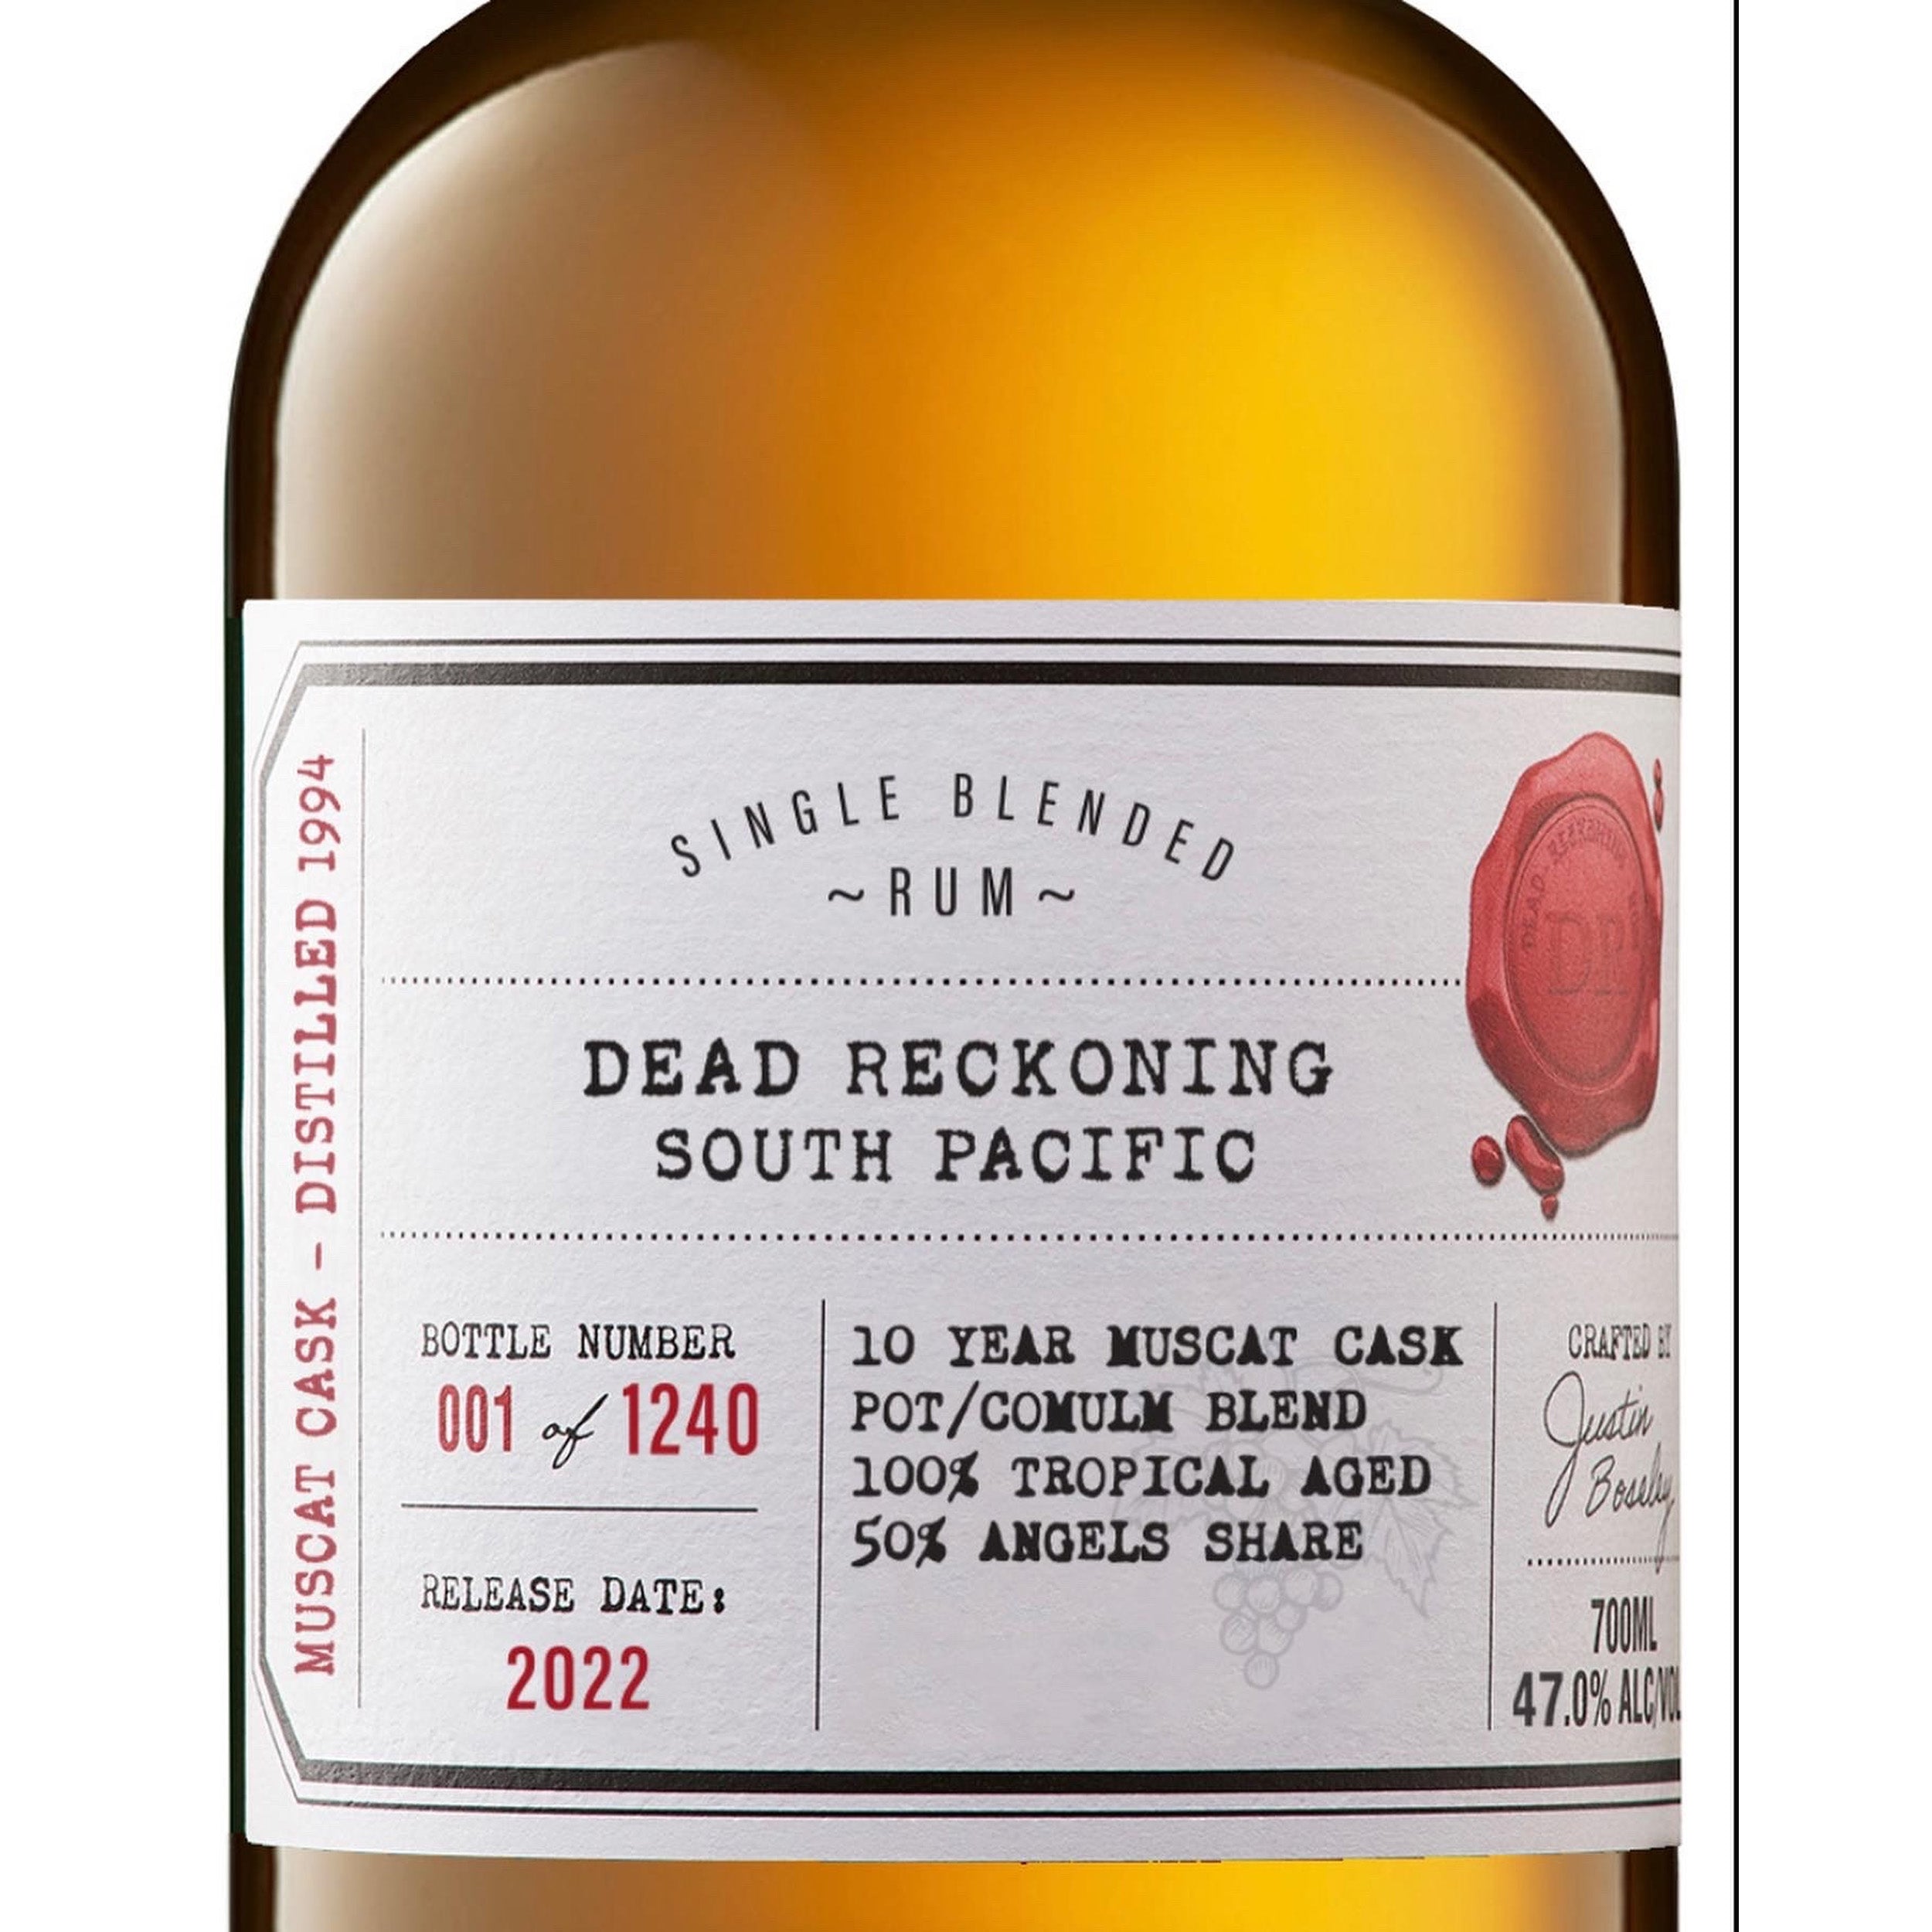 Dead Reckoning South Pacific (Fiji - Muscat) Rum